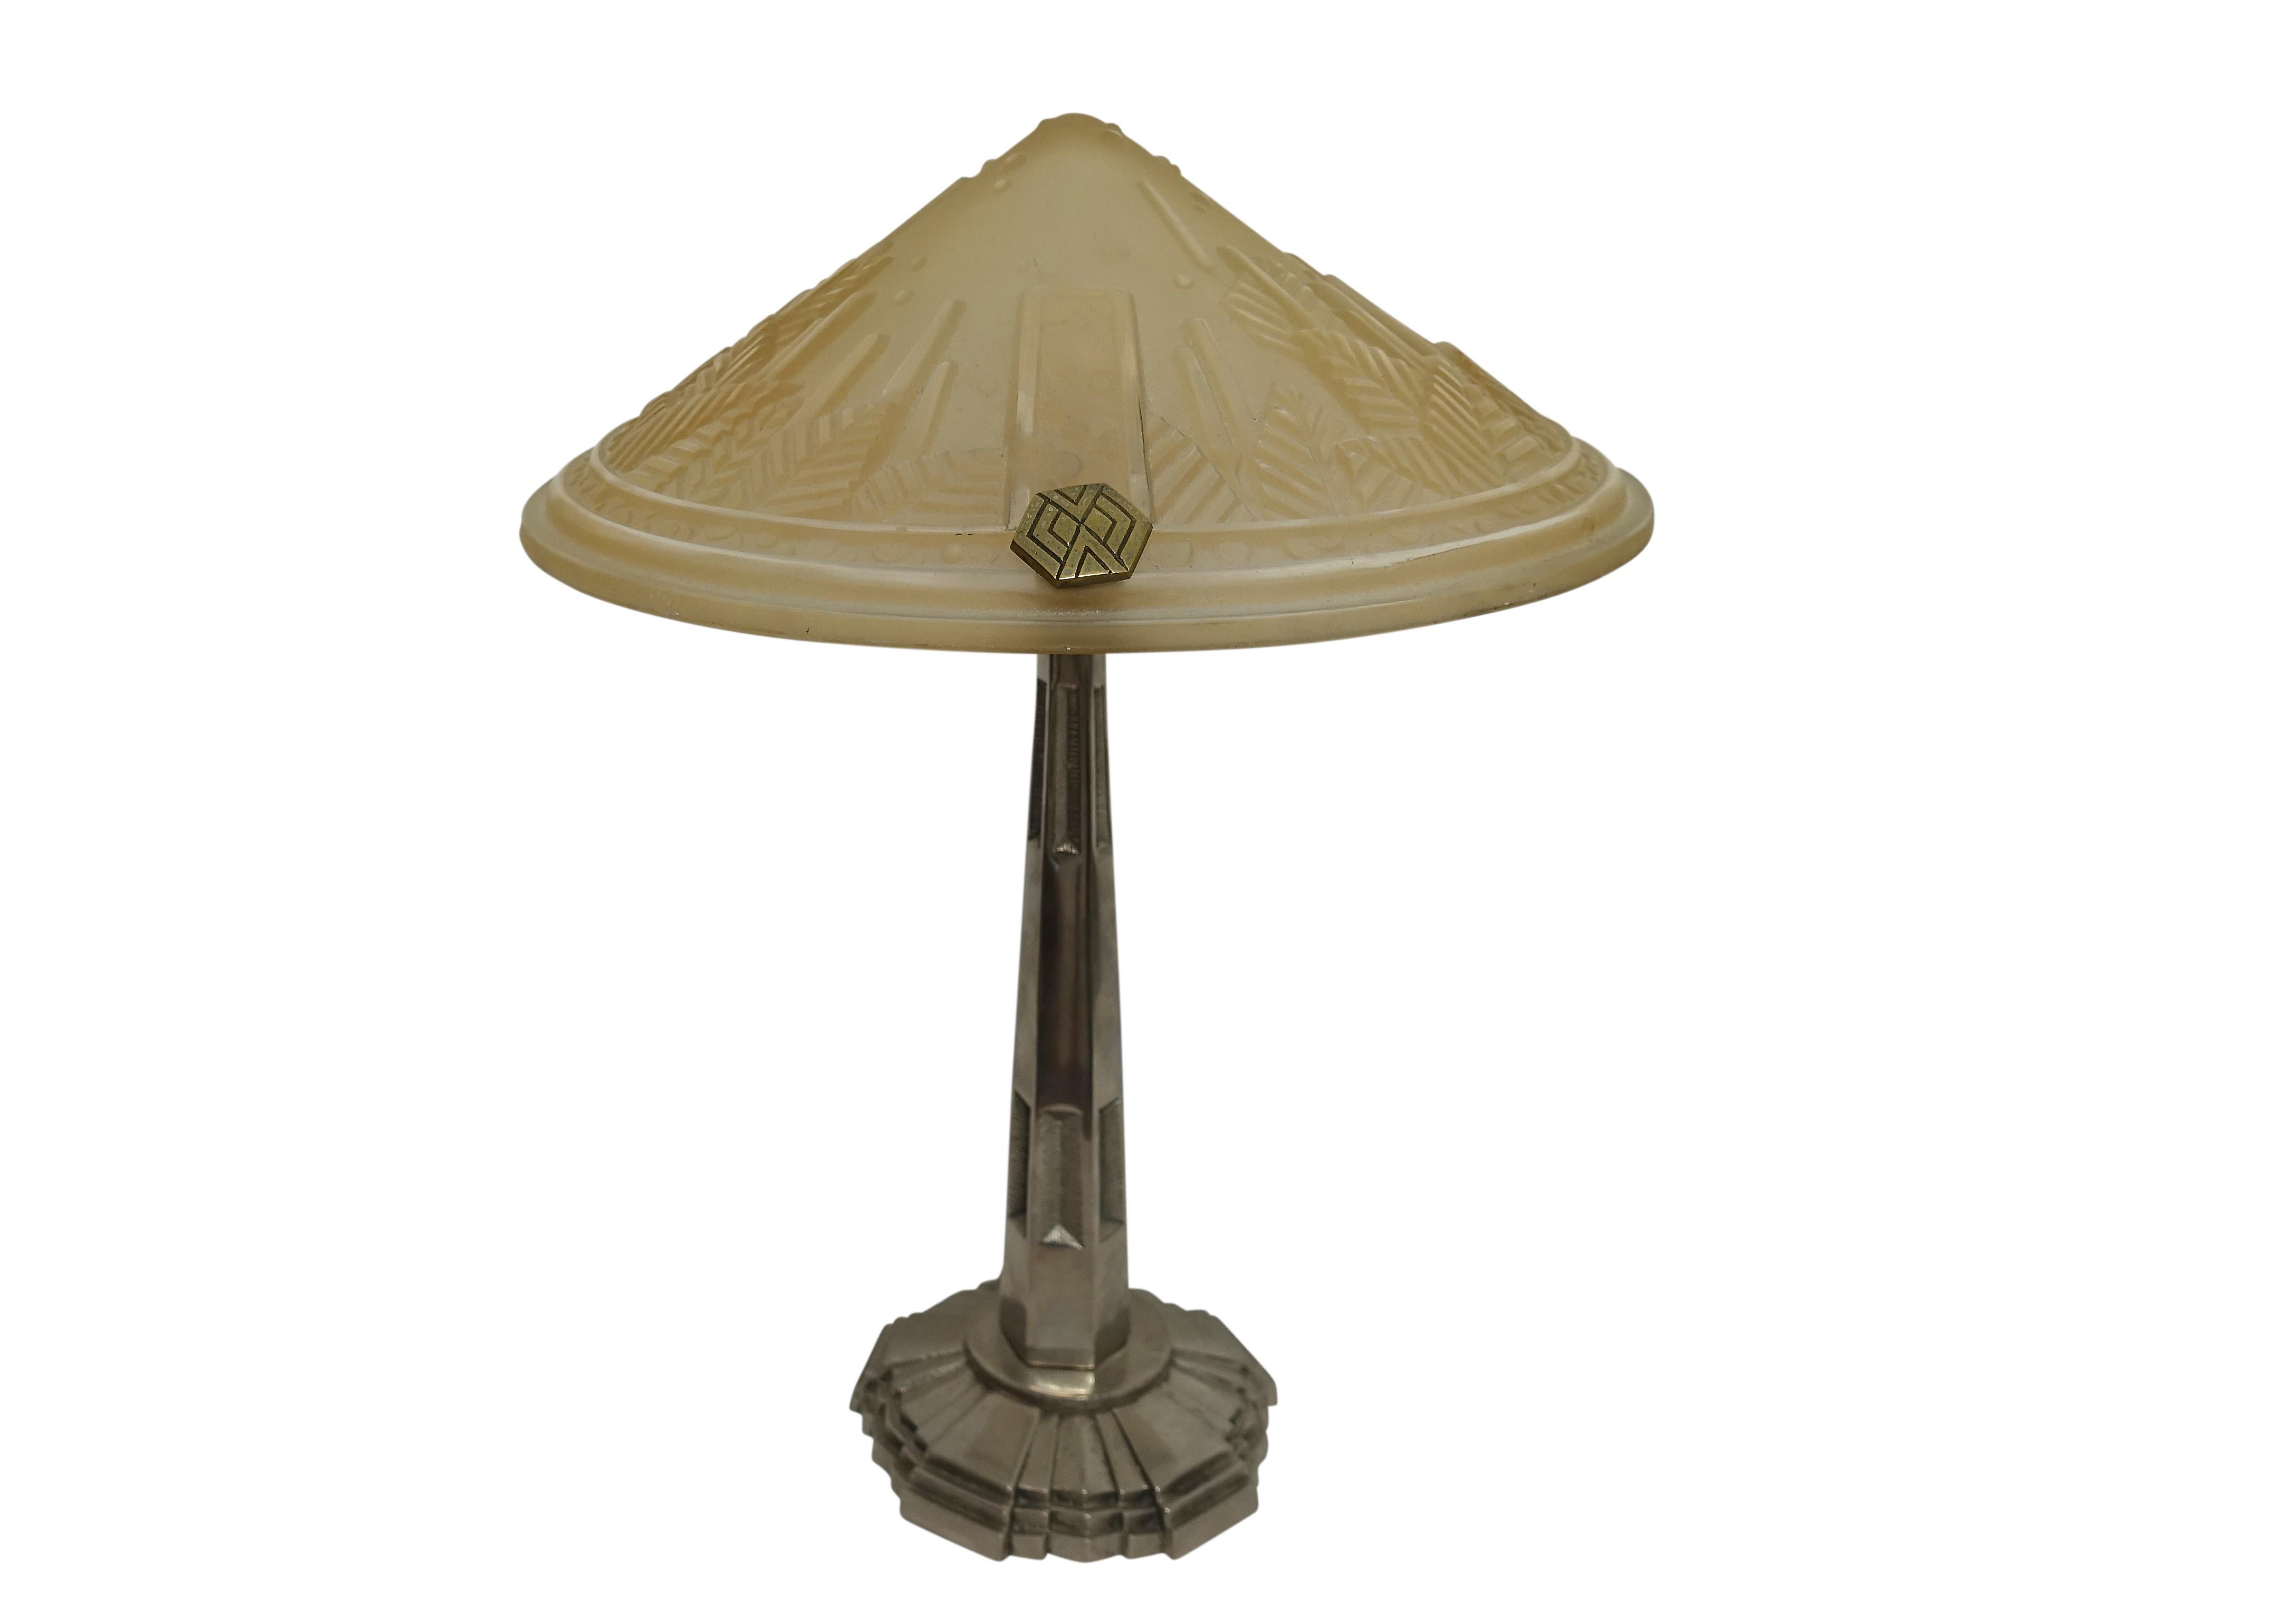 Lovely quality Art Deco period lamp, having a molded and acid etched opaque glass shade with a polished nickel base. Holds a single light bulb, and has a dimmer switch on the cloth cord.